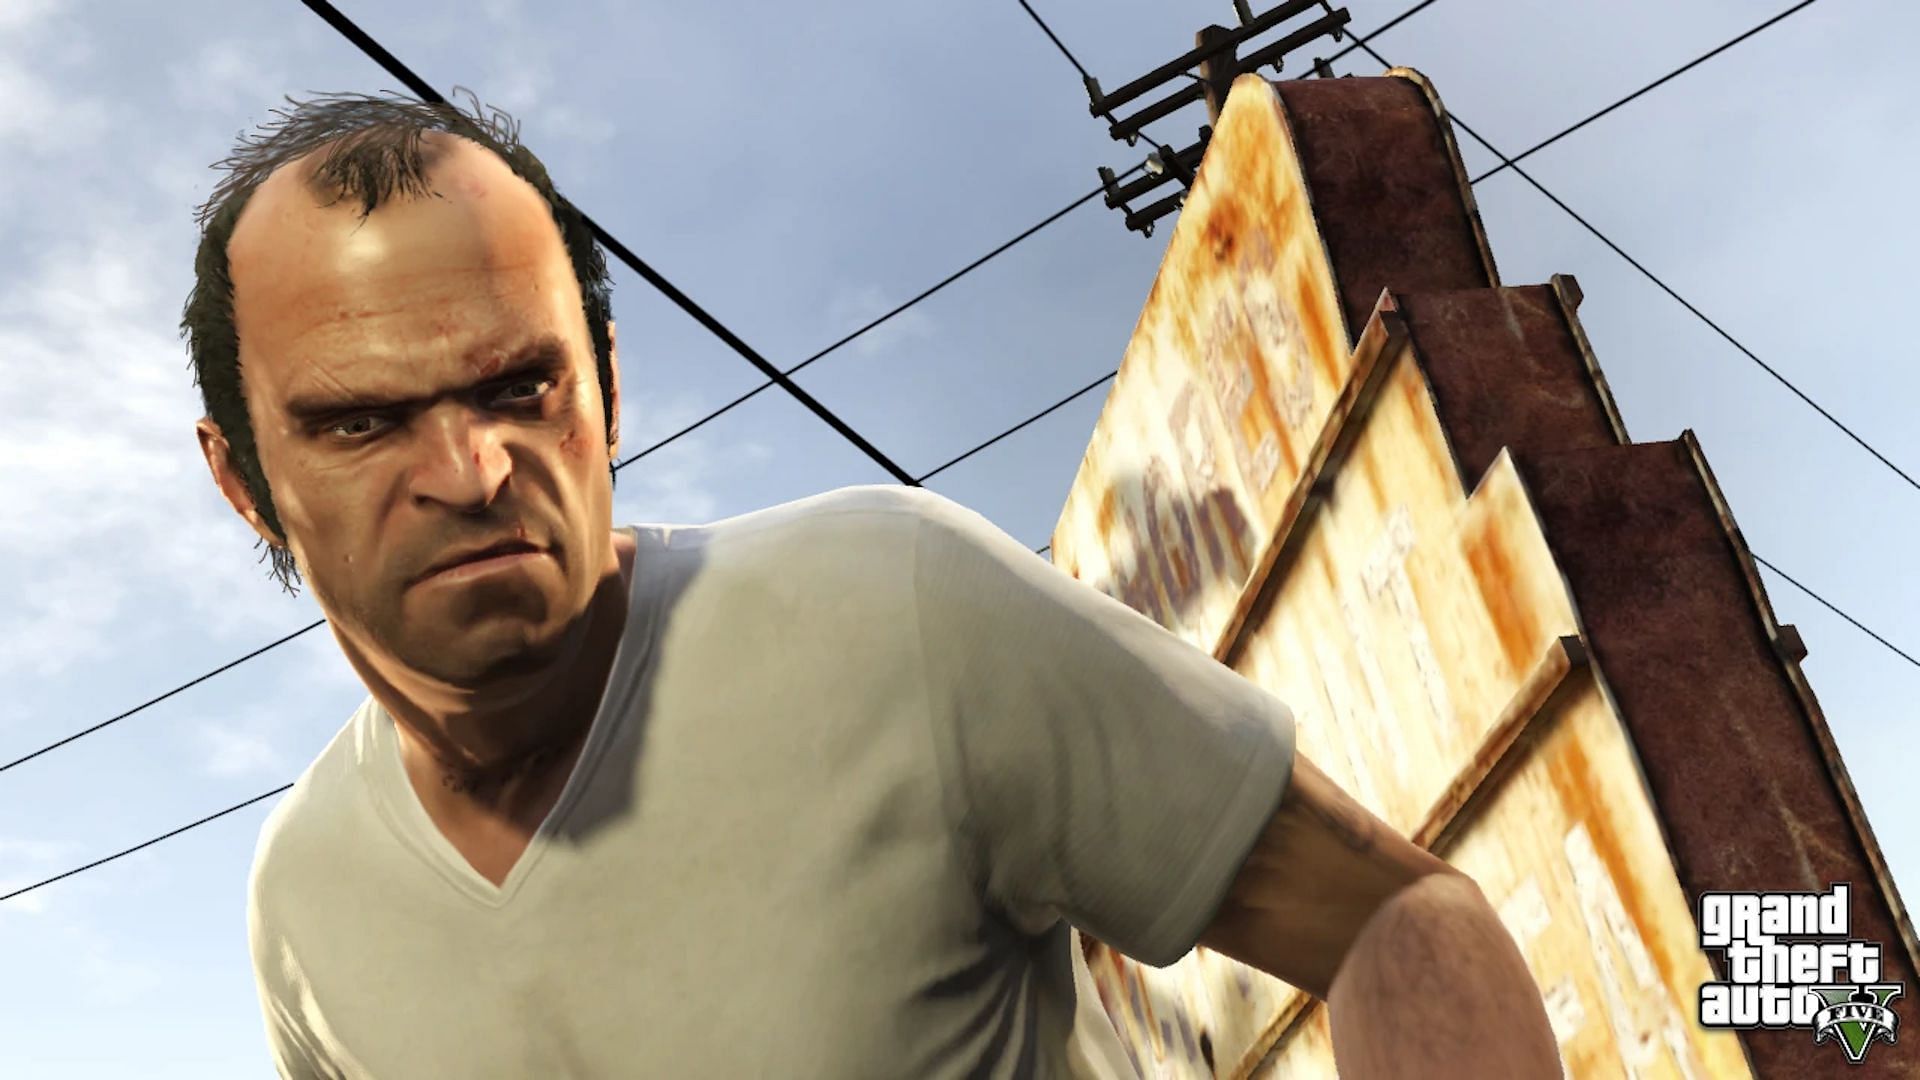 Most Grand Theft Auto fans should know this character (Image via Rockstar Games)